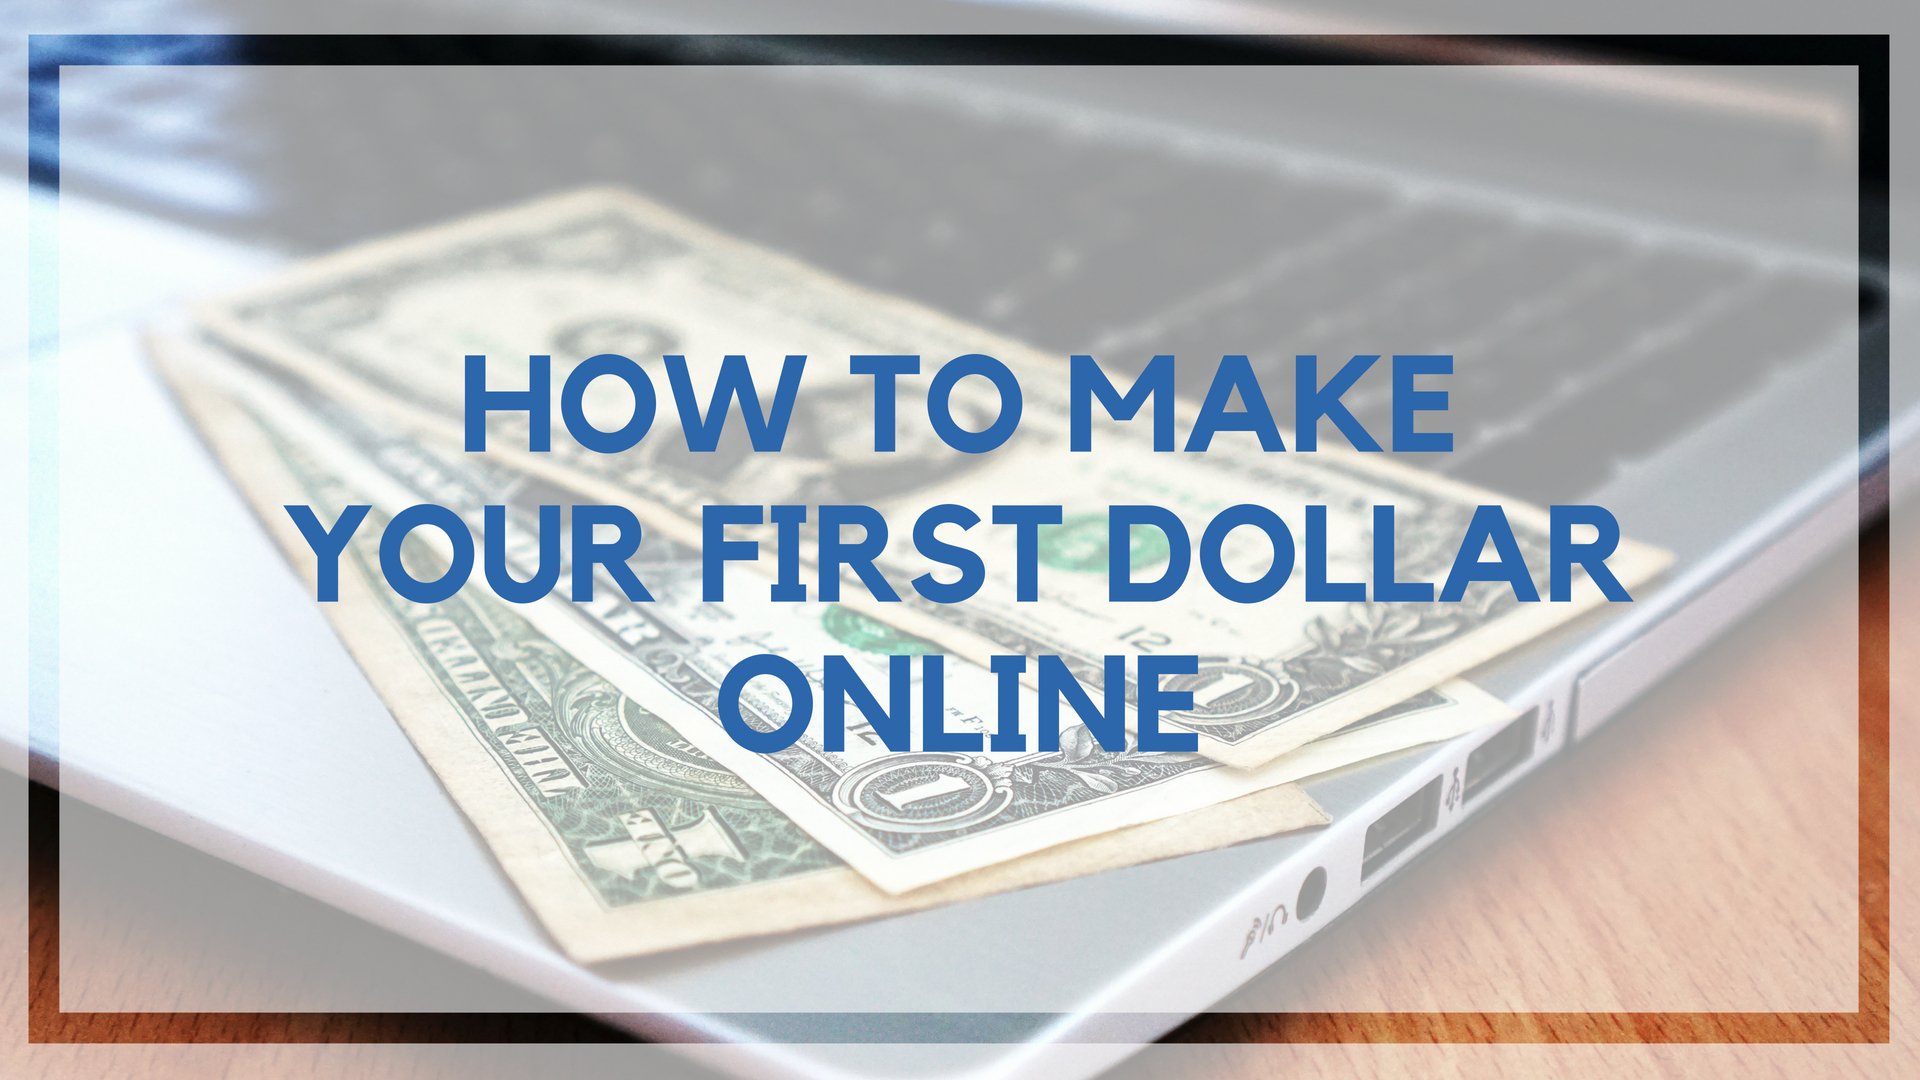 How to Make Your First Dollar Online